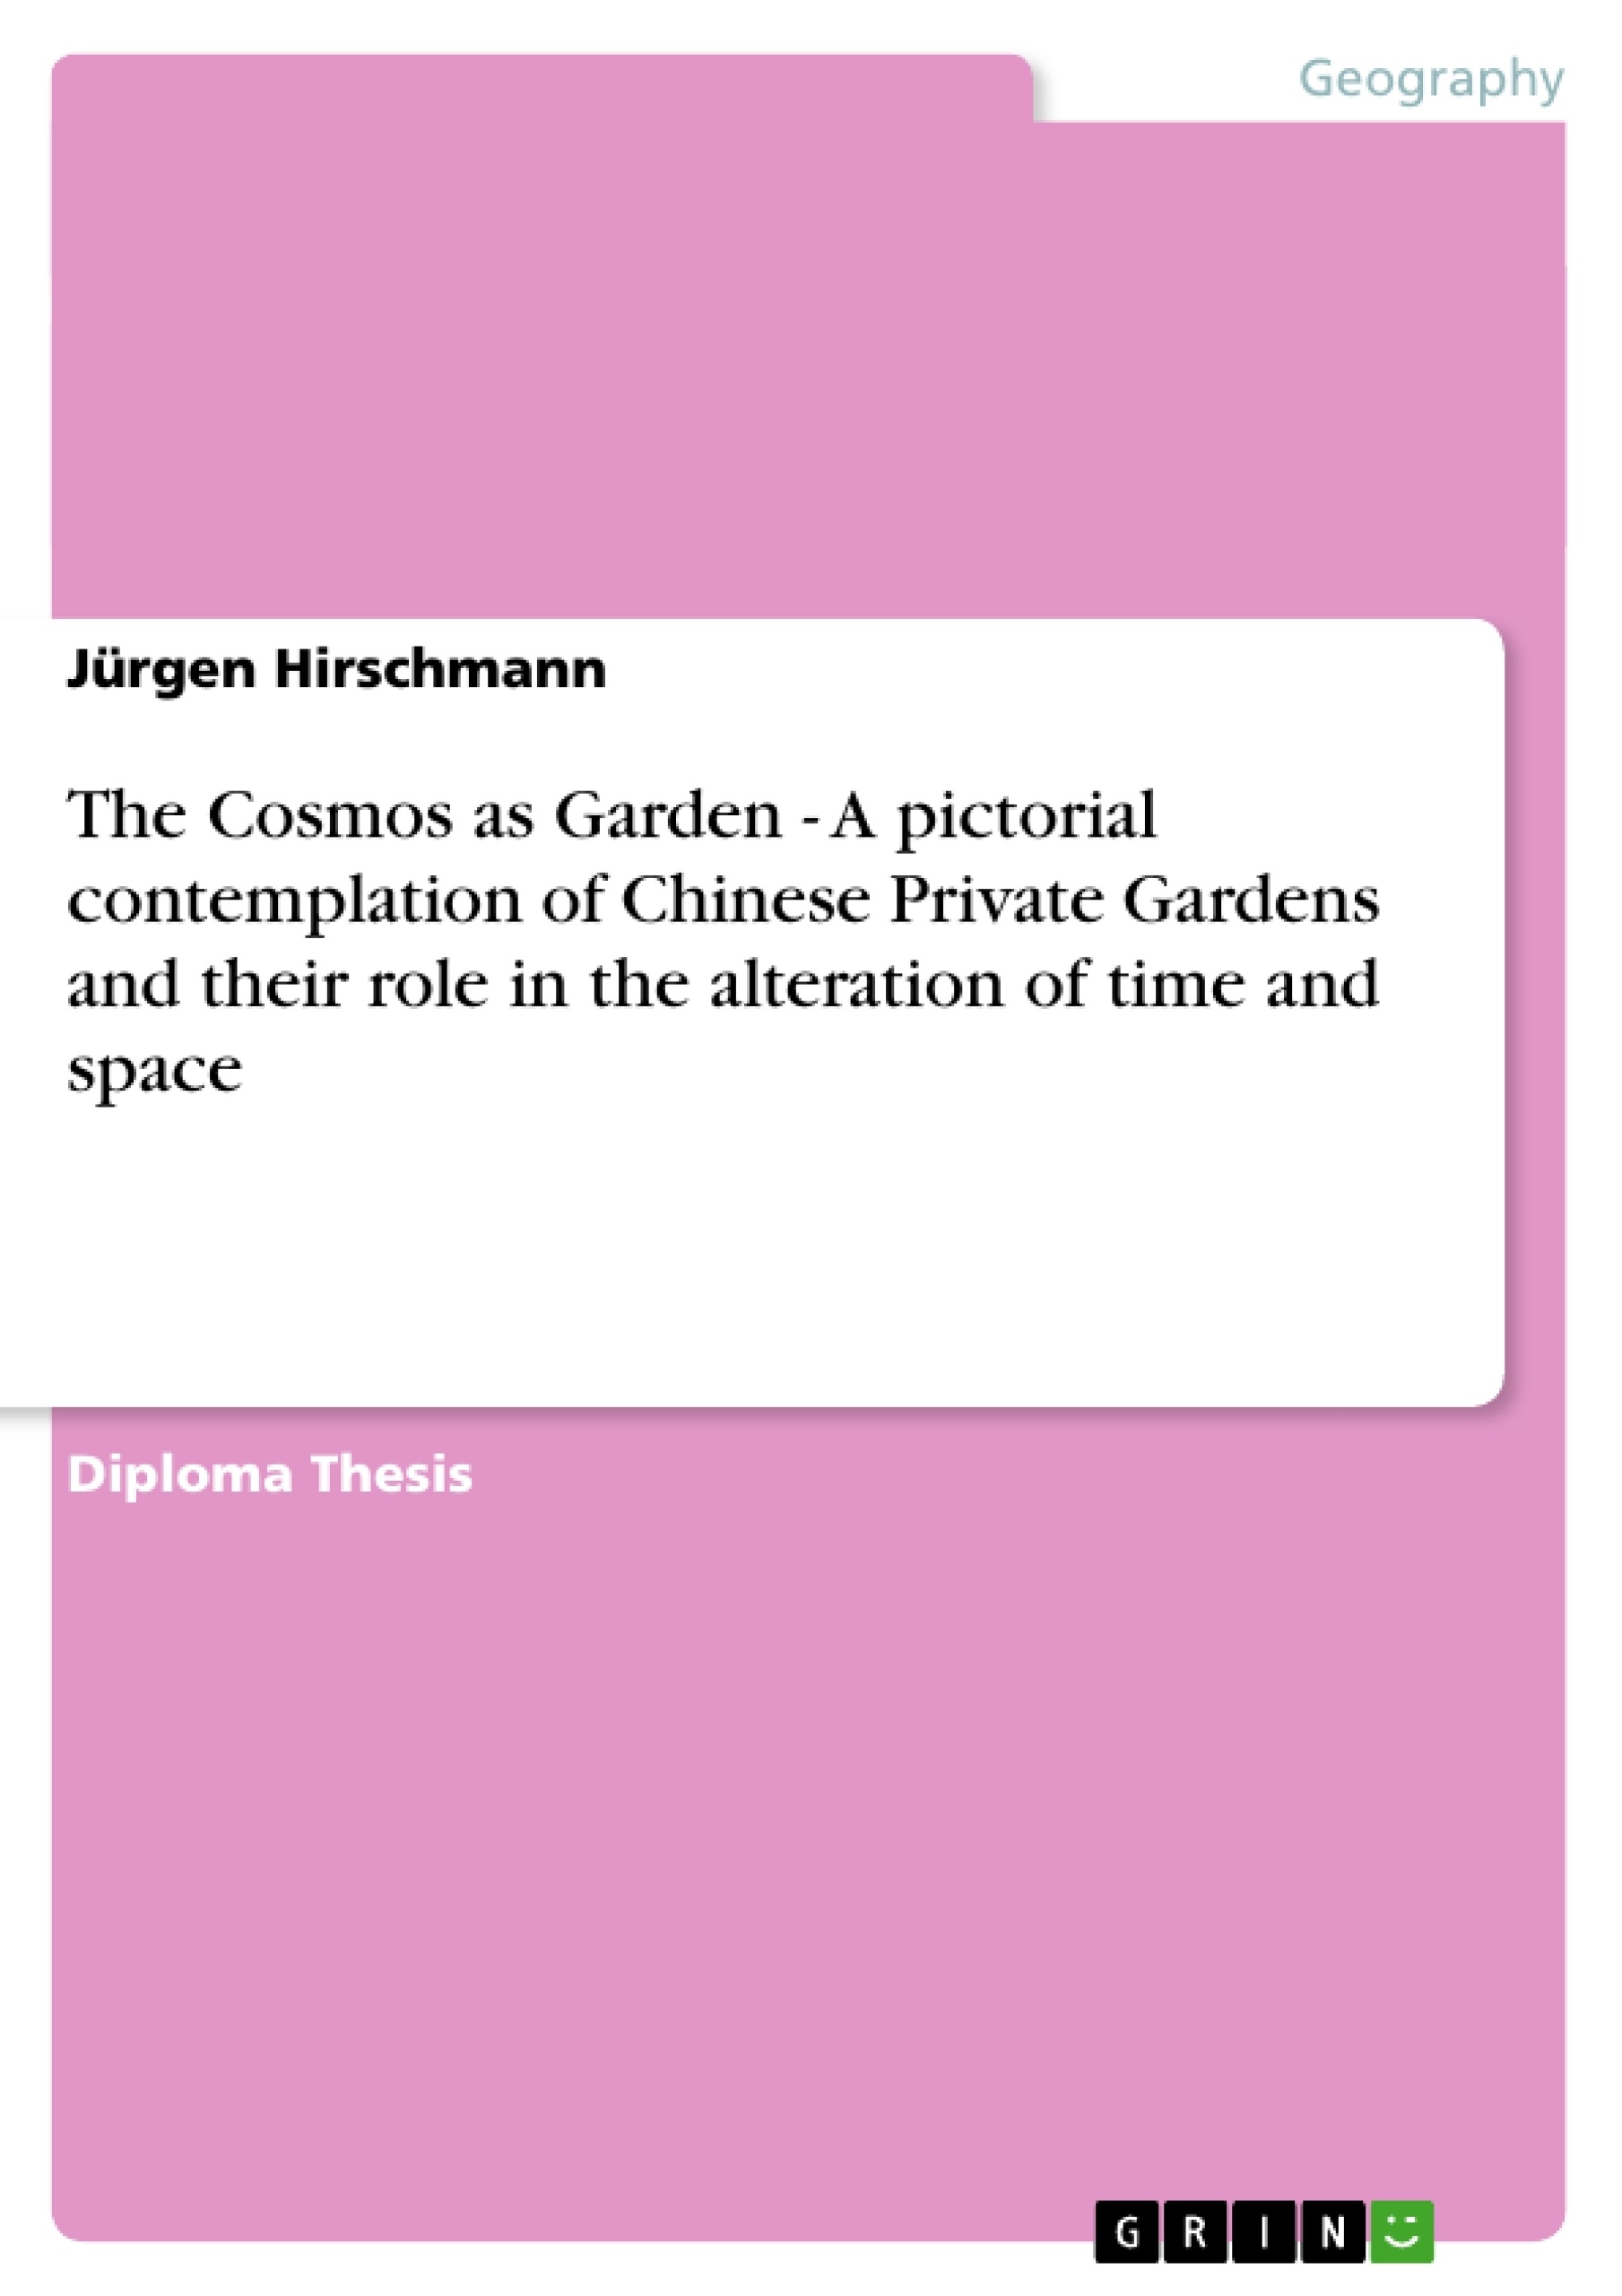 Título: The Cosmos as Garden - A pictorial contemplation of Chinese Private Gardens and their role in the alteration of time and space